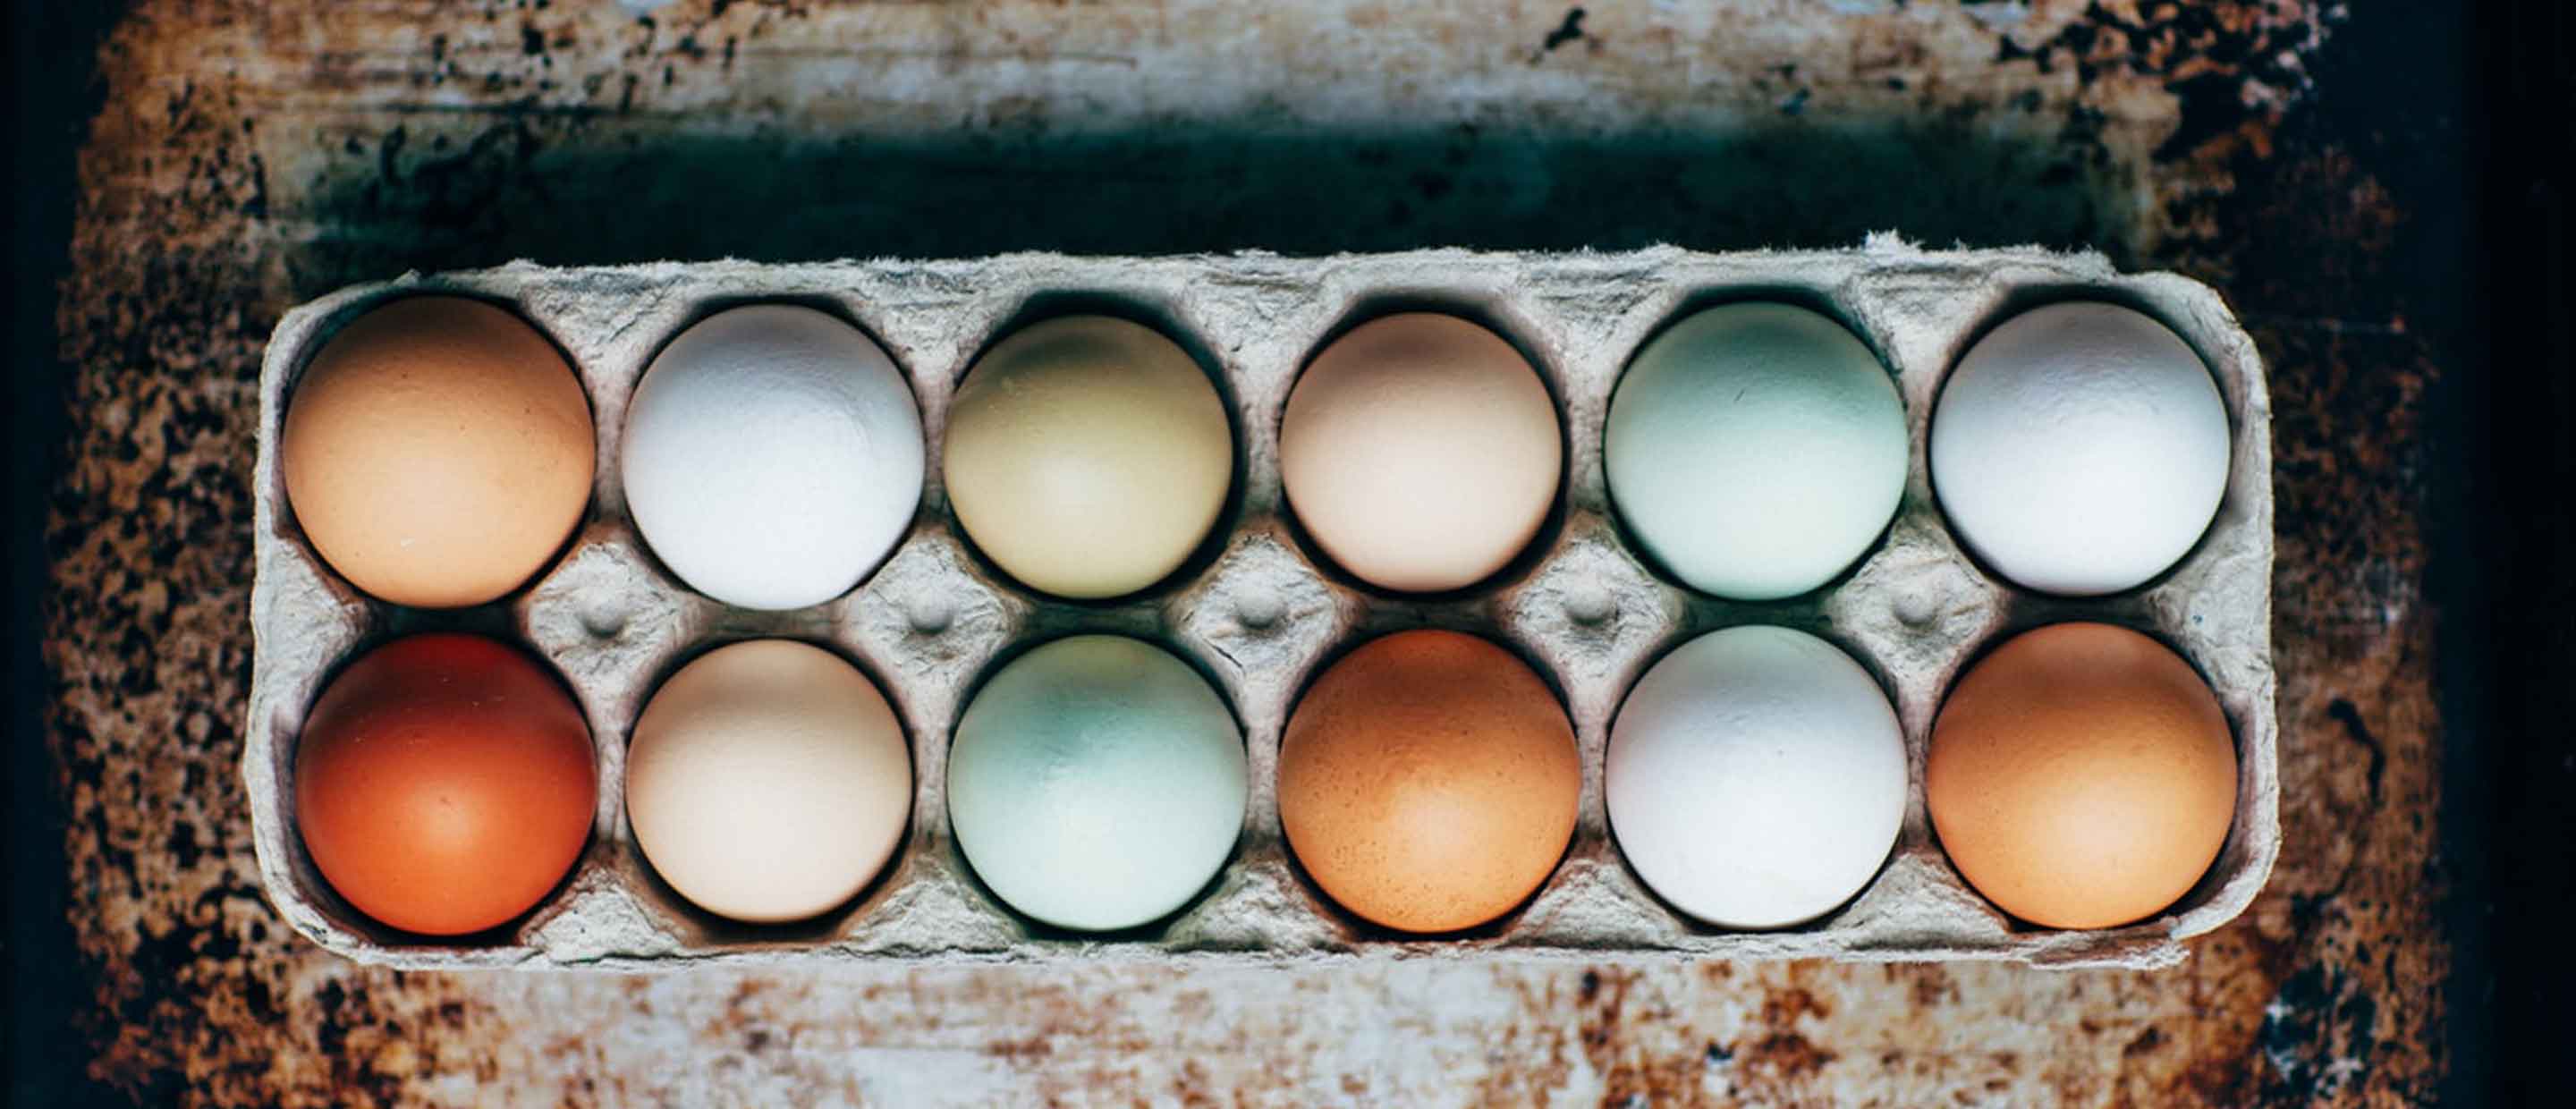 managing eggs and baskets | SAA